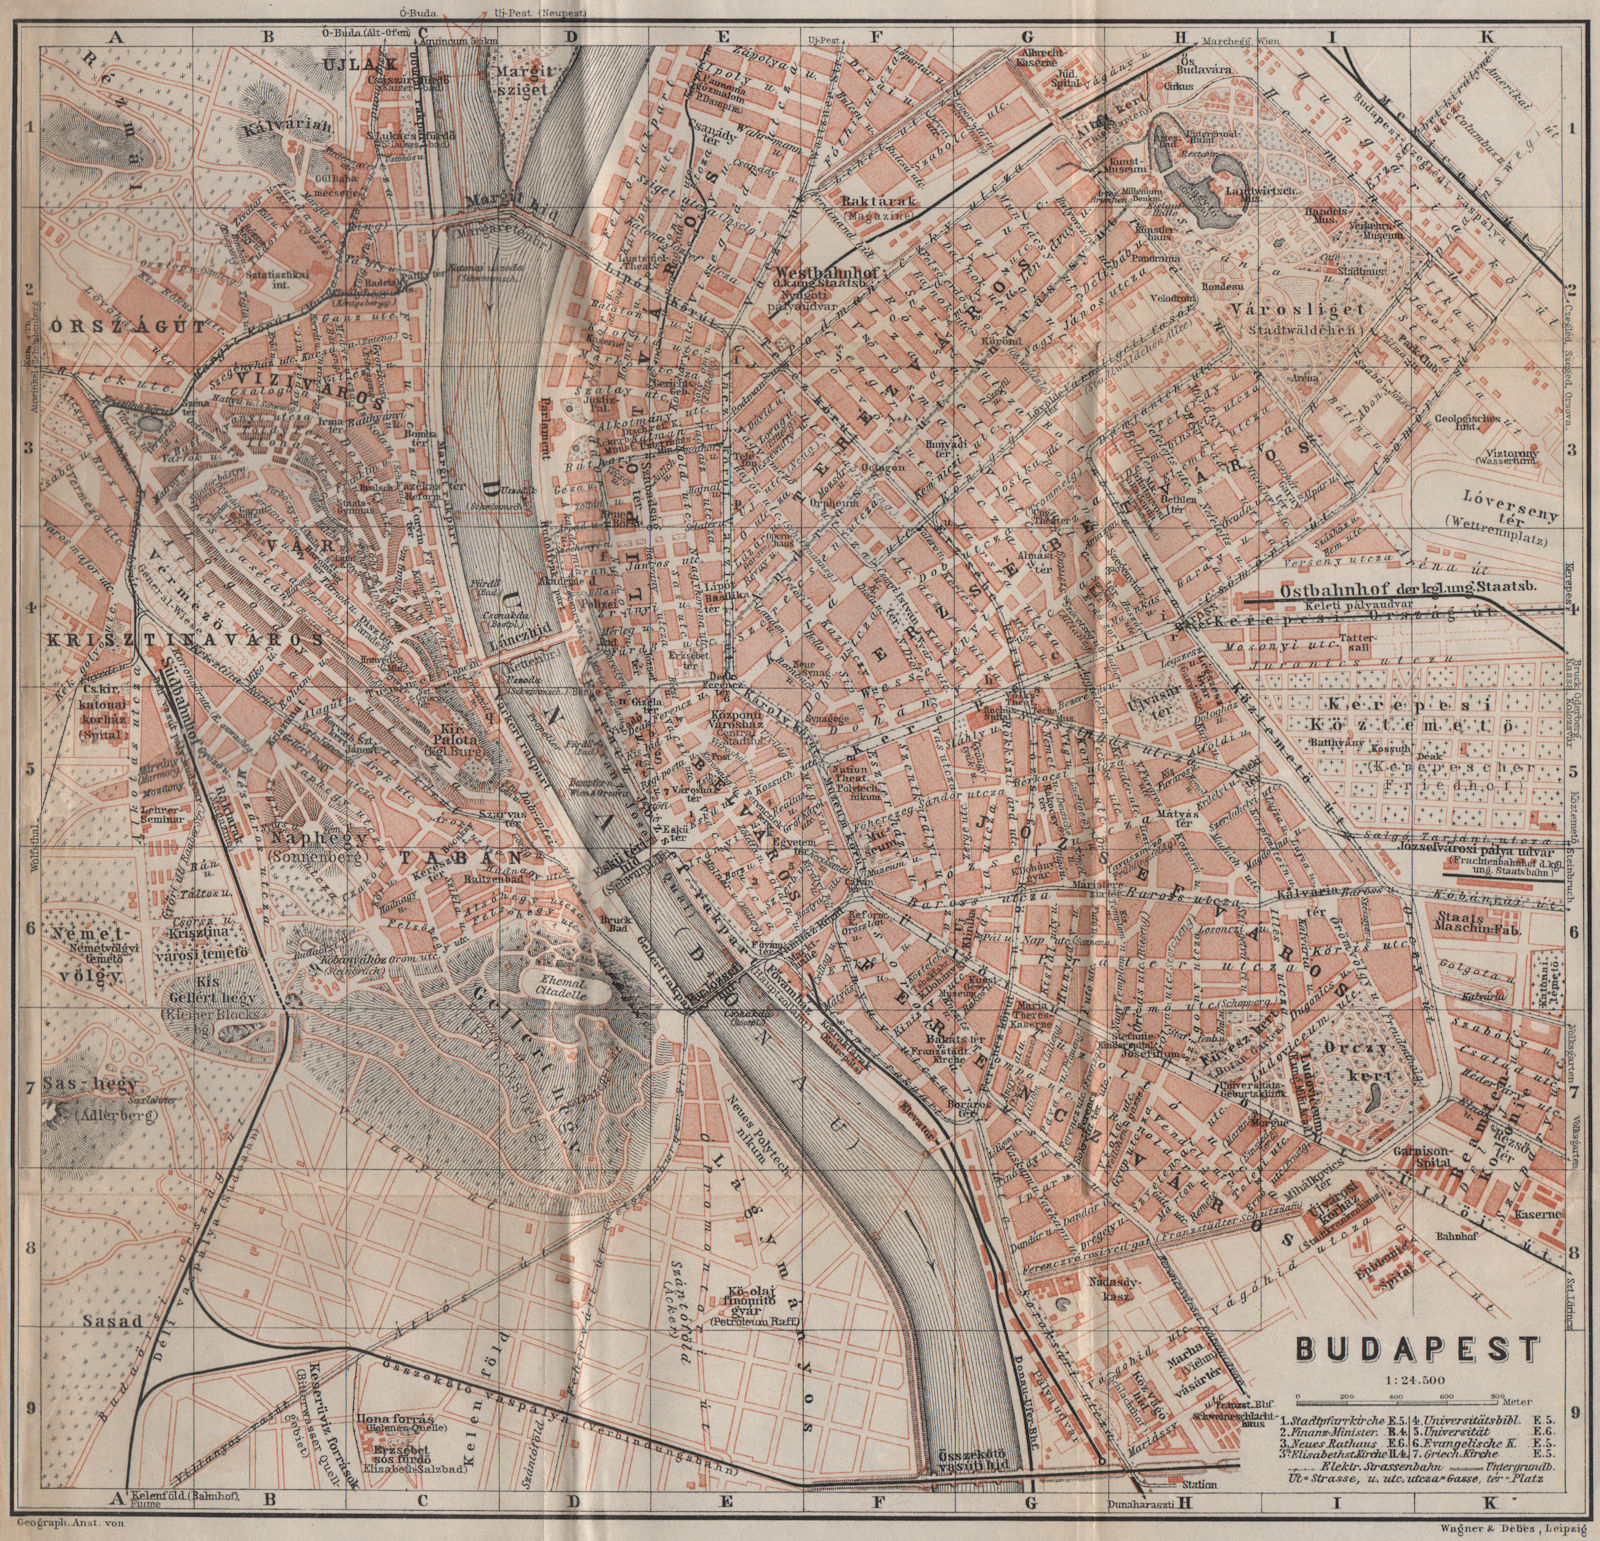 BUDAPEST antique town city plan. Hungary. Magyarorszag terkep 1905 old map